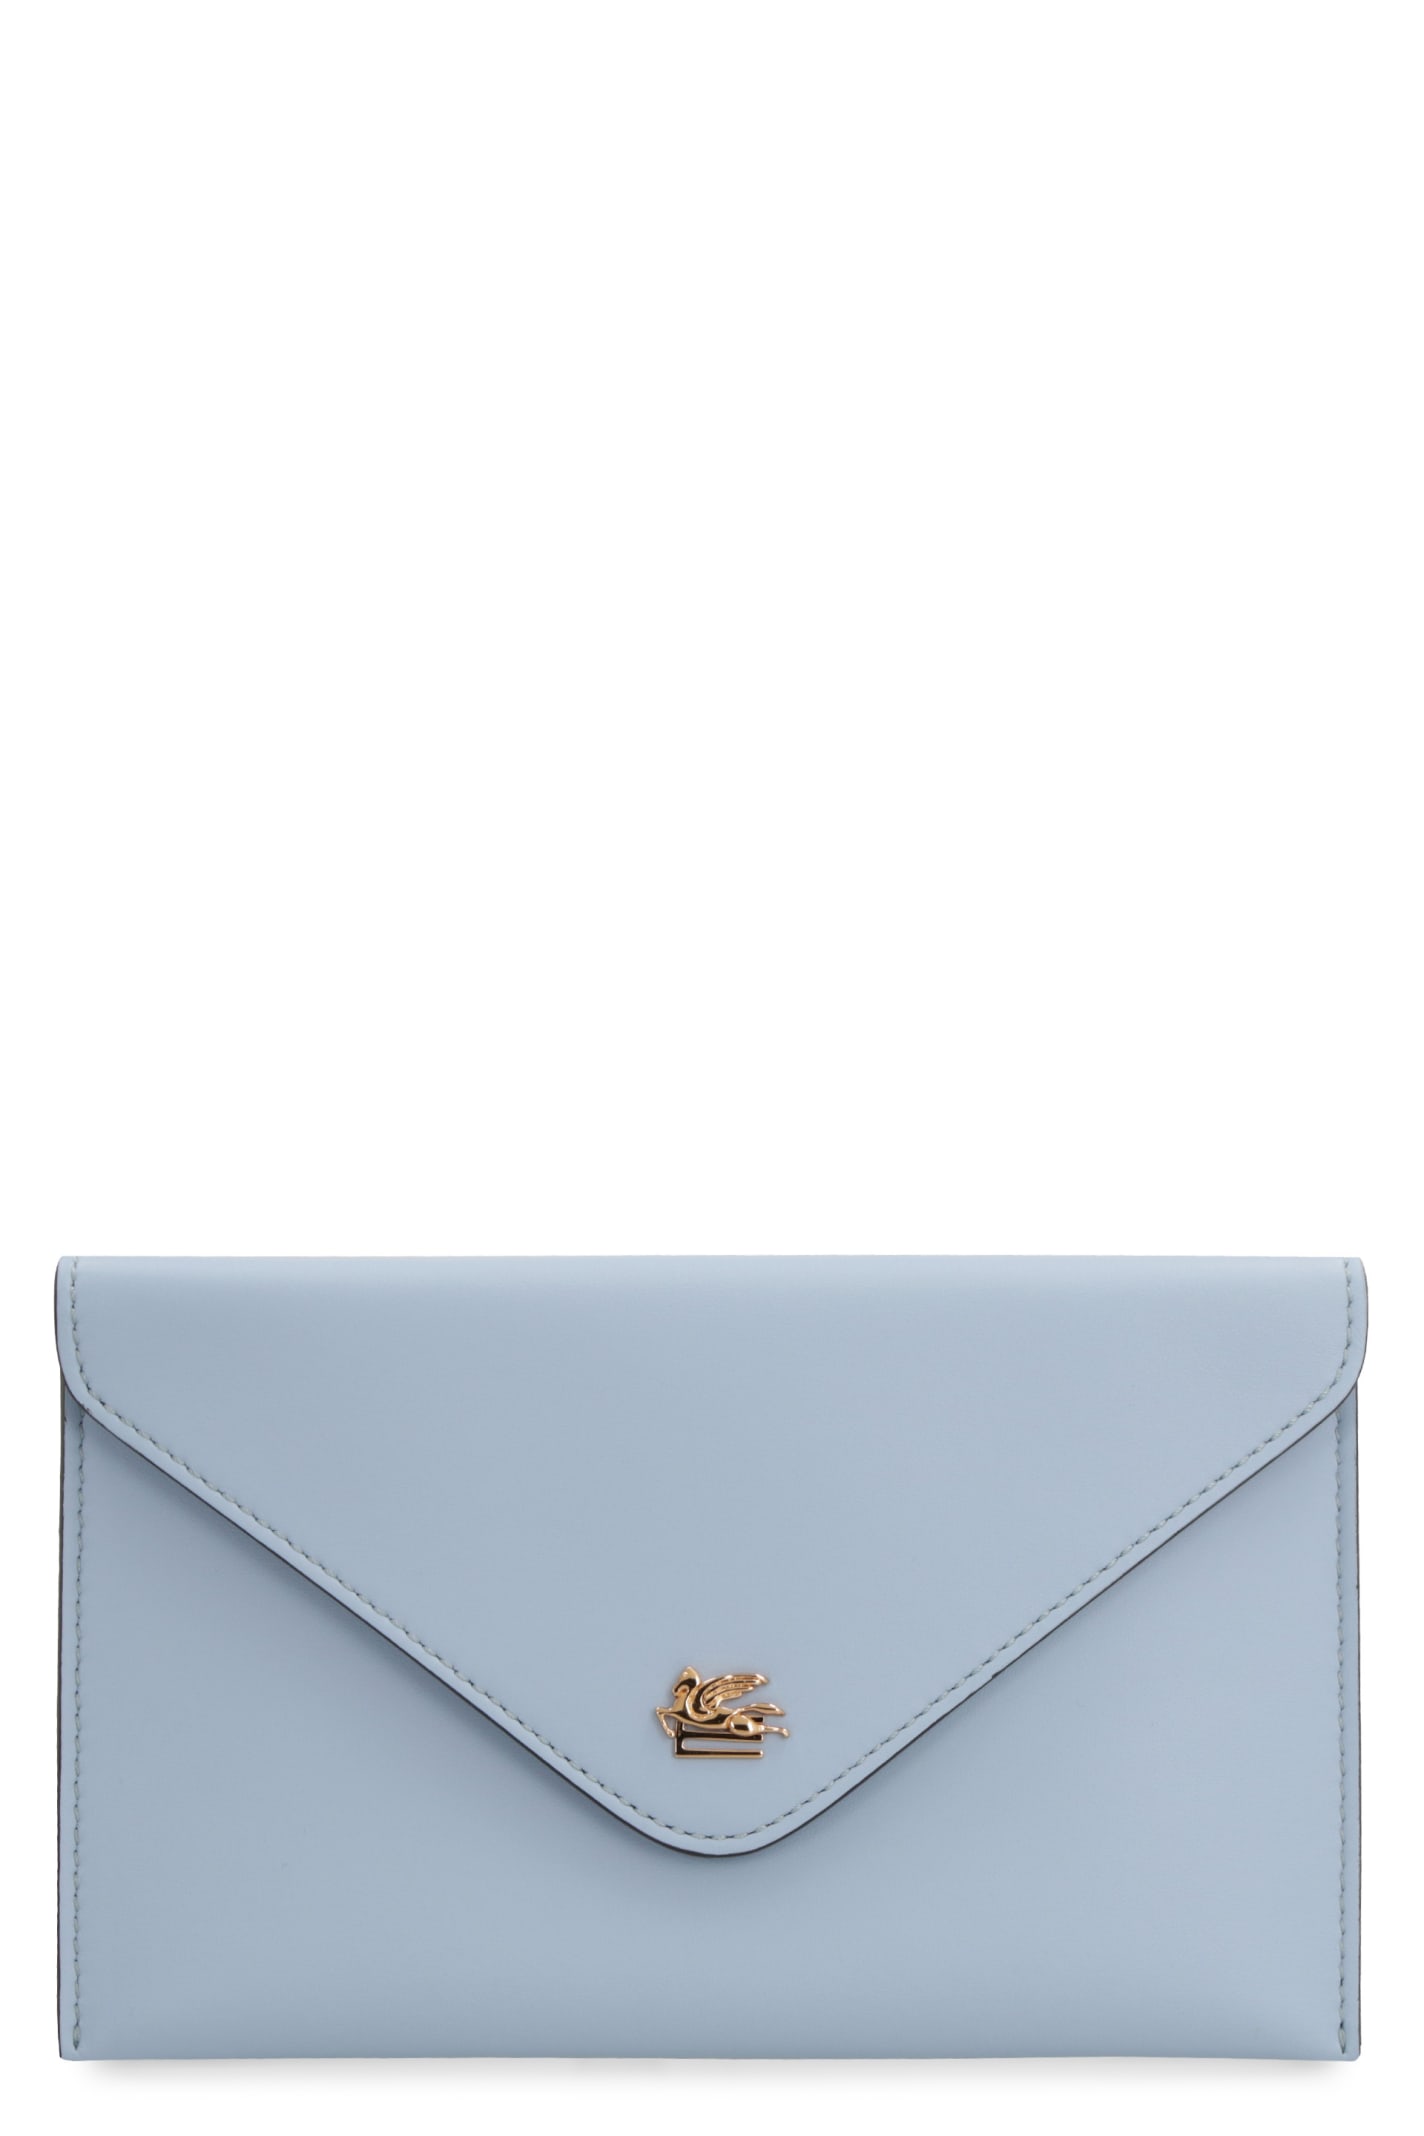 Etro Leather Flat Pouch